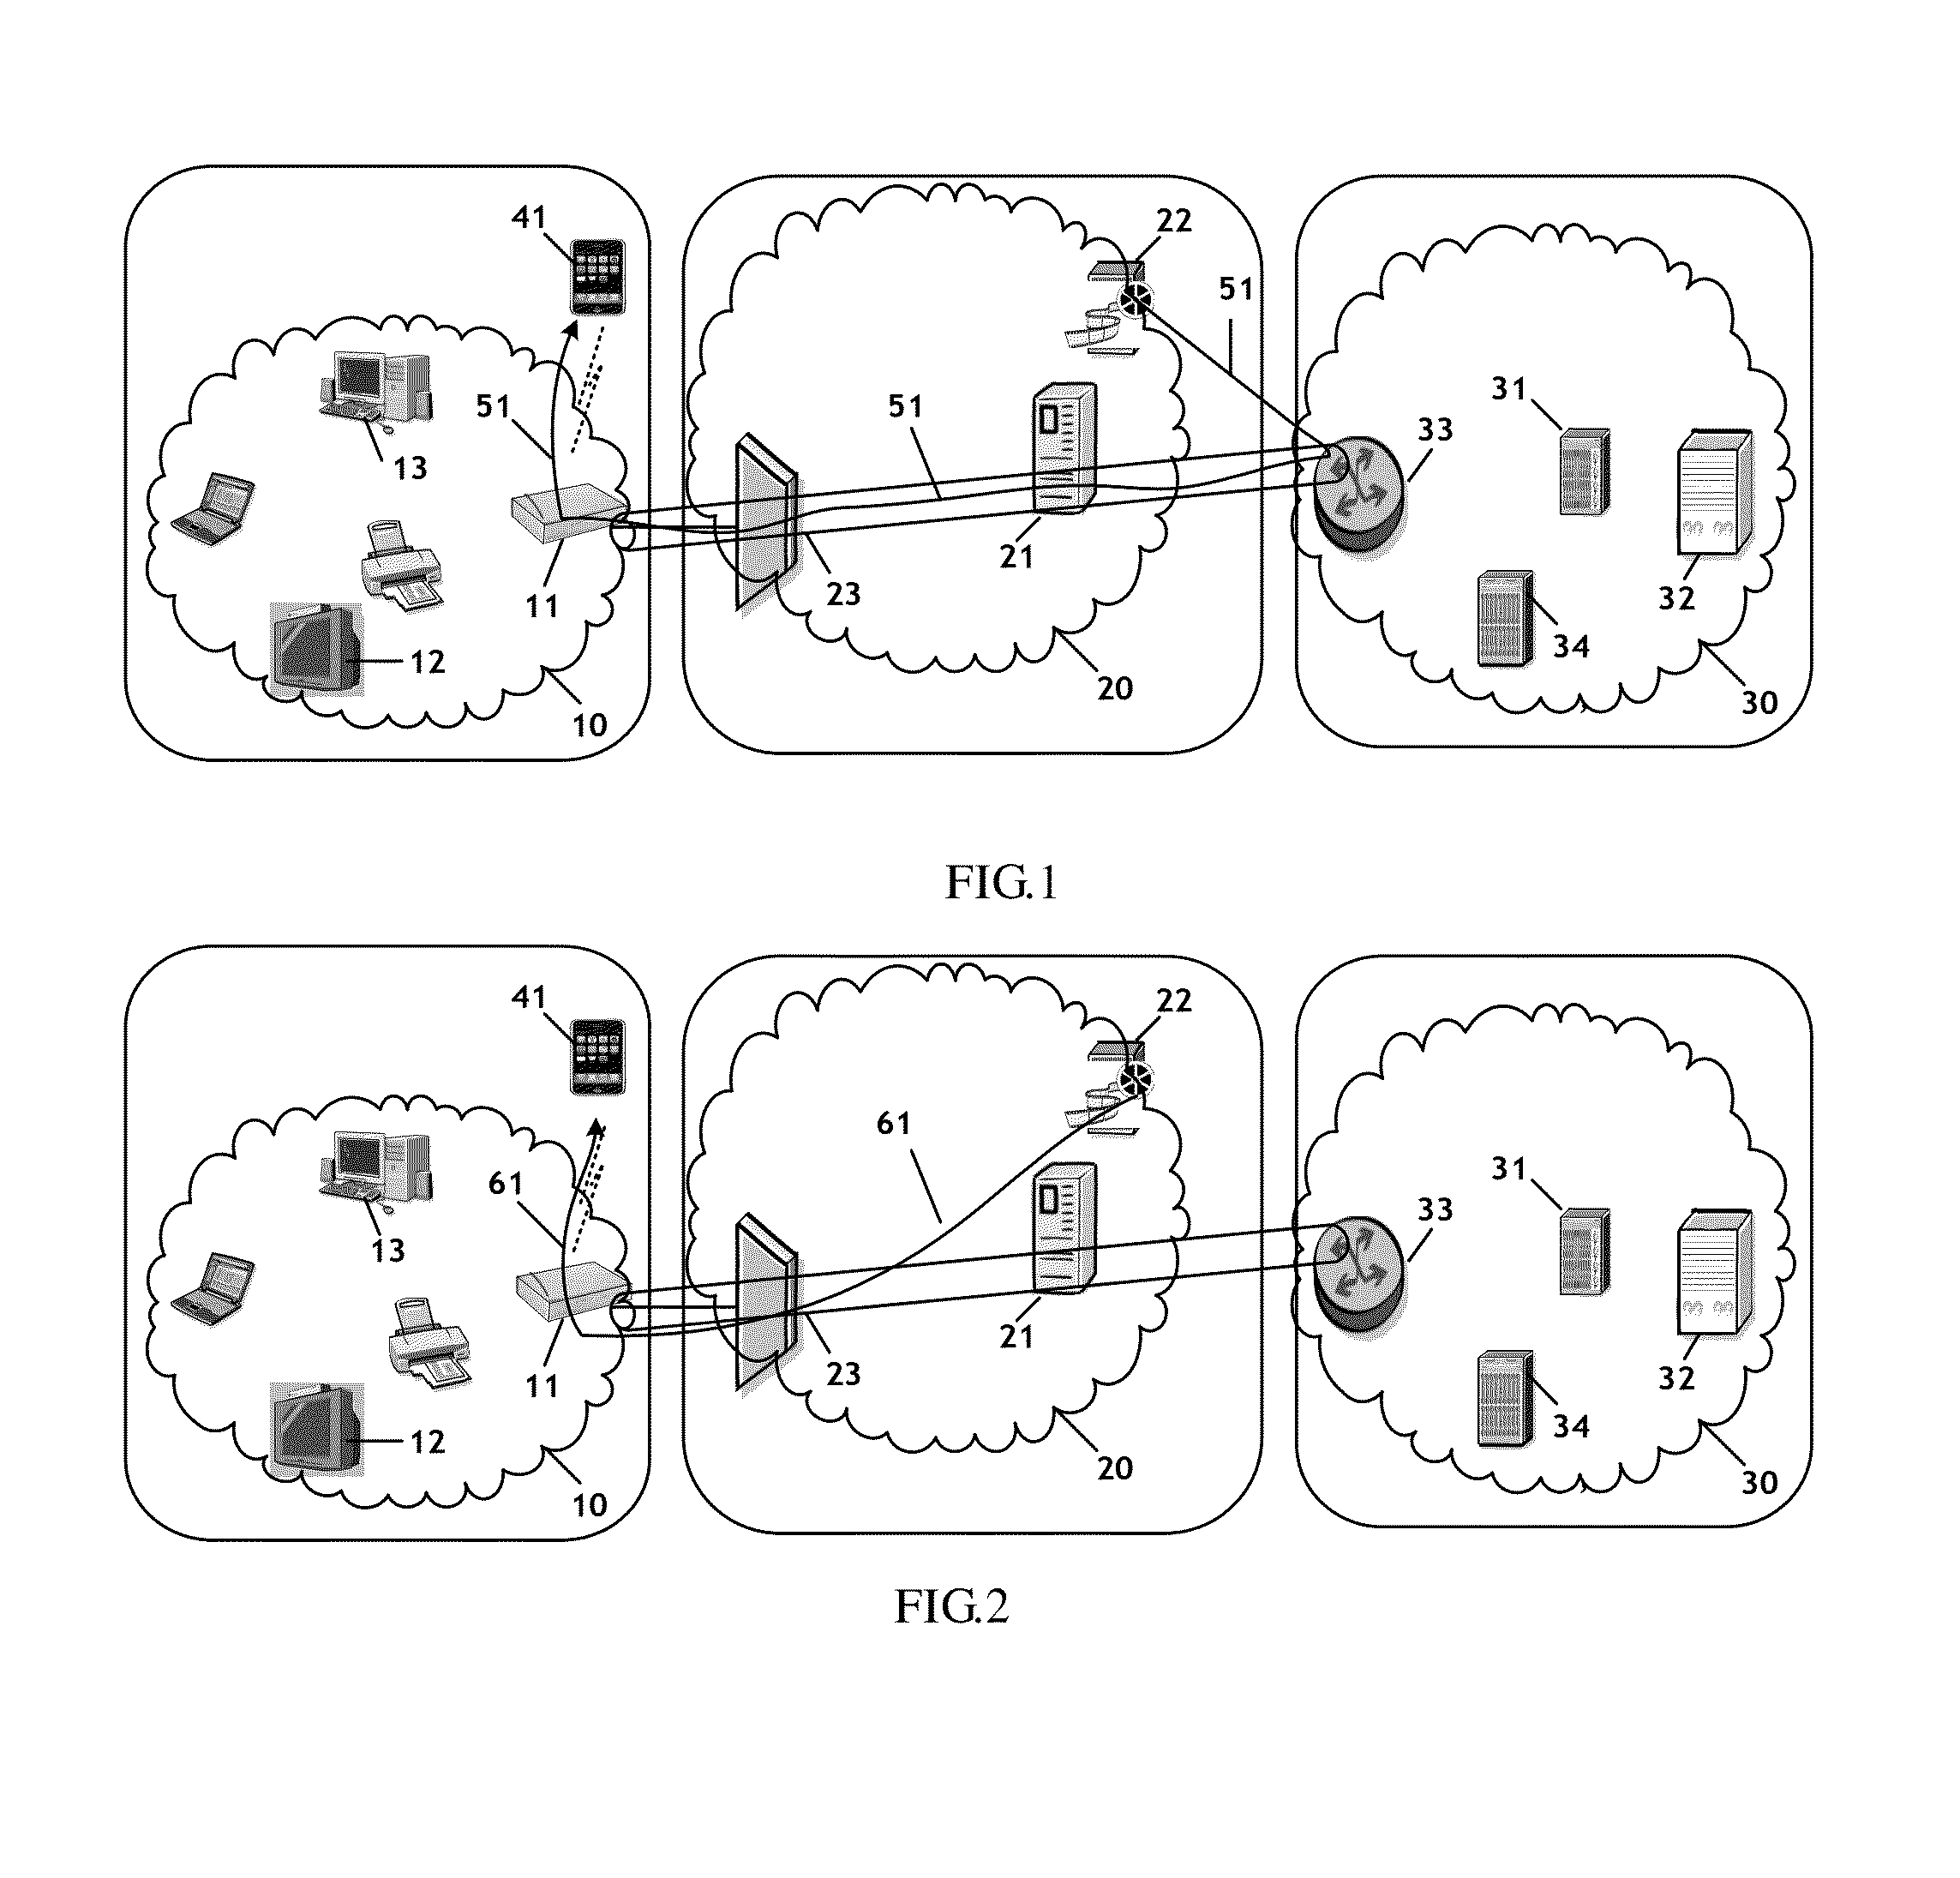 Method and apparatus for authenticating a user equipment